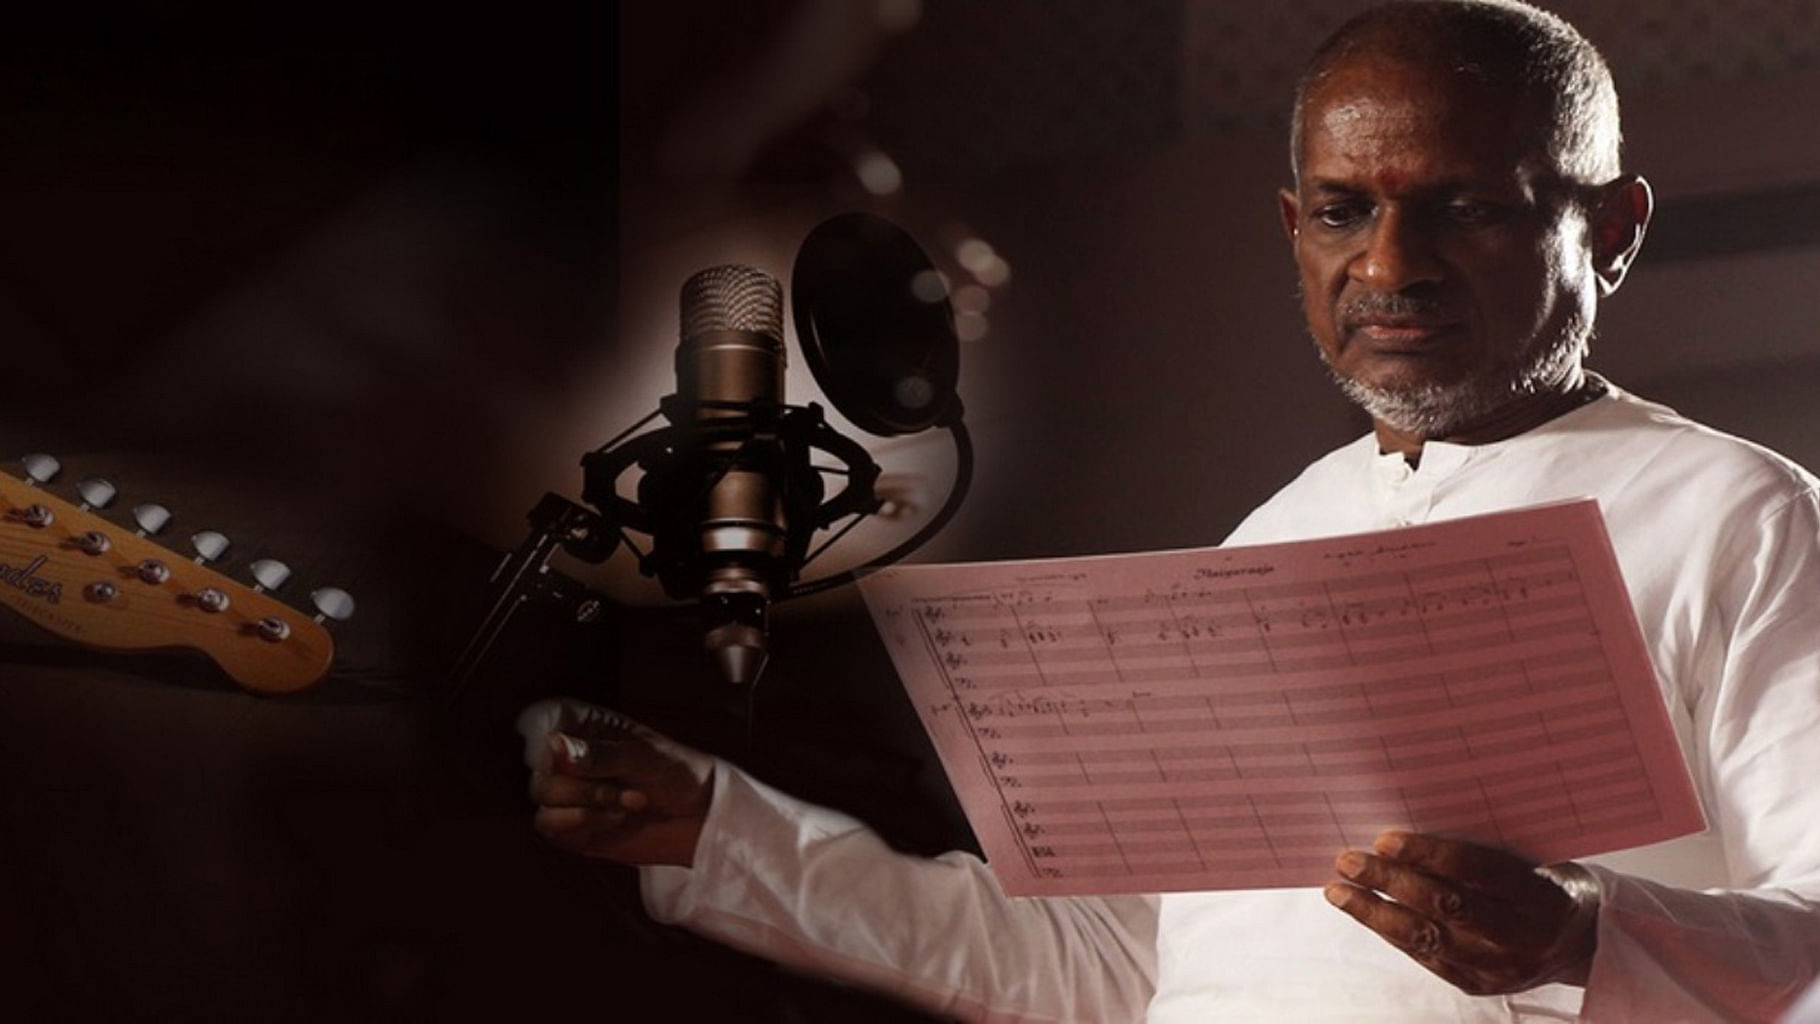 Ilayaraja scored for his 1000th movie in December last year. (Photo Courtesy: <a href="https://www.facebook.com/Ilaiyaraaja/photos/a.920507394660475.1073741827.918608478183700/949163171794897/?type=3&amp;theater">Ilayaraja’s Facebook page</a>)